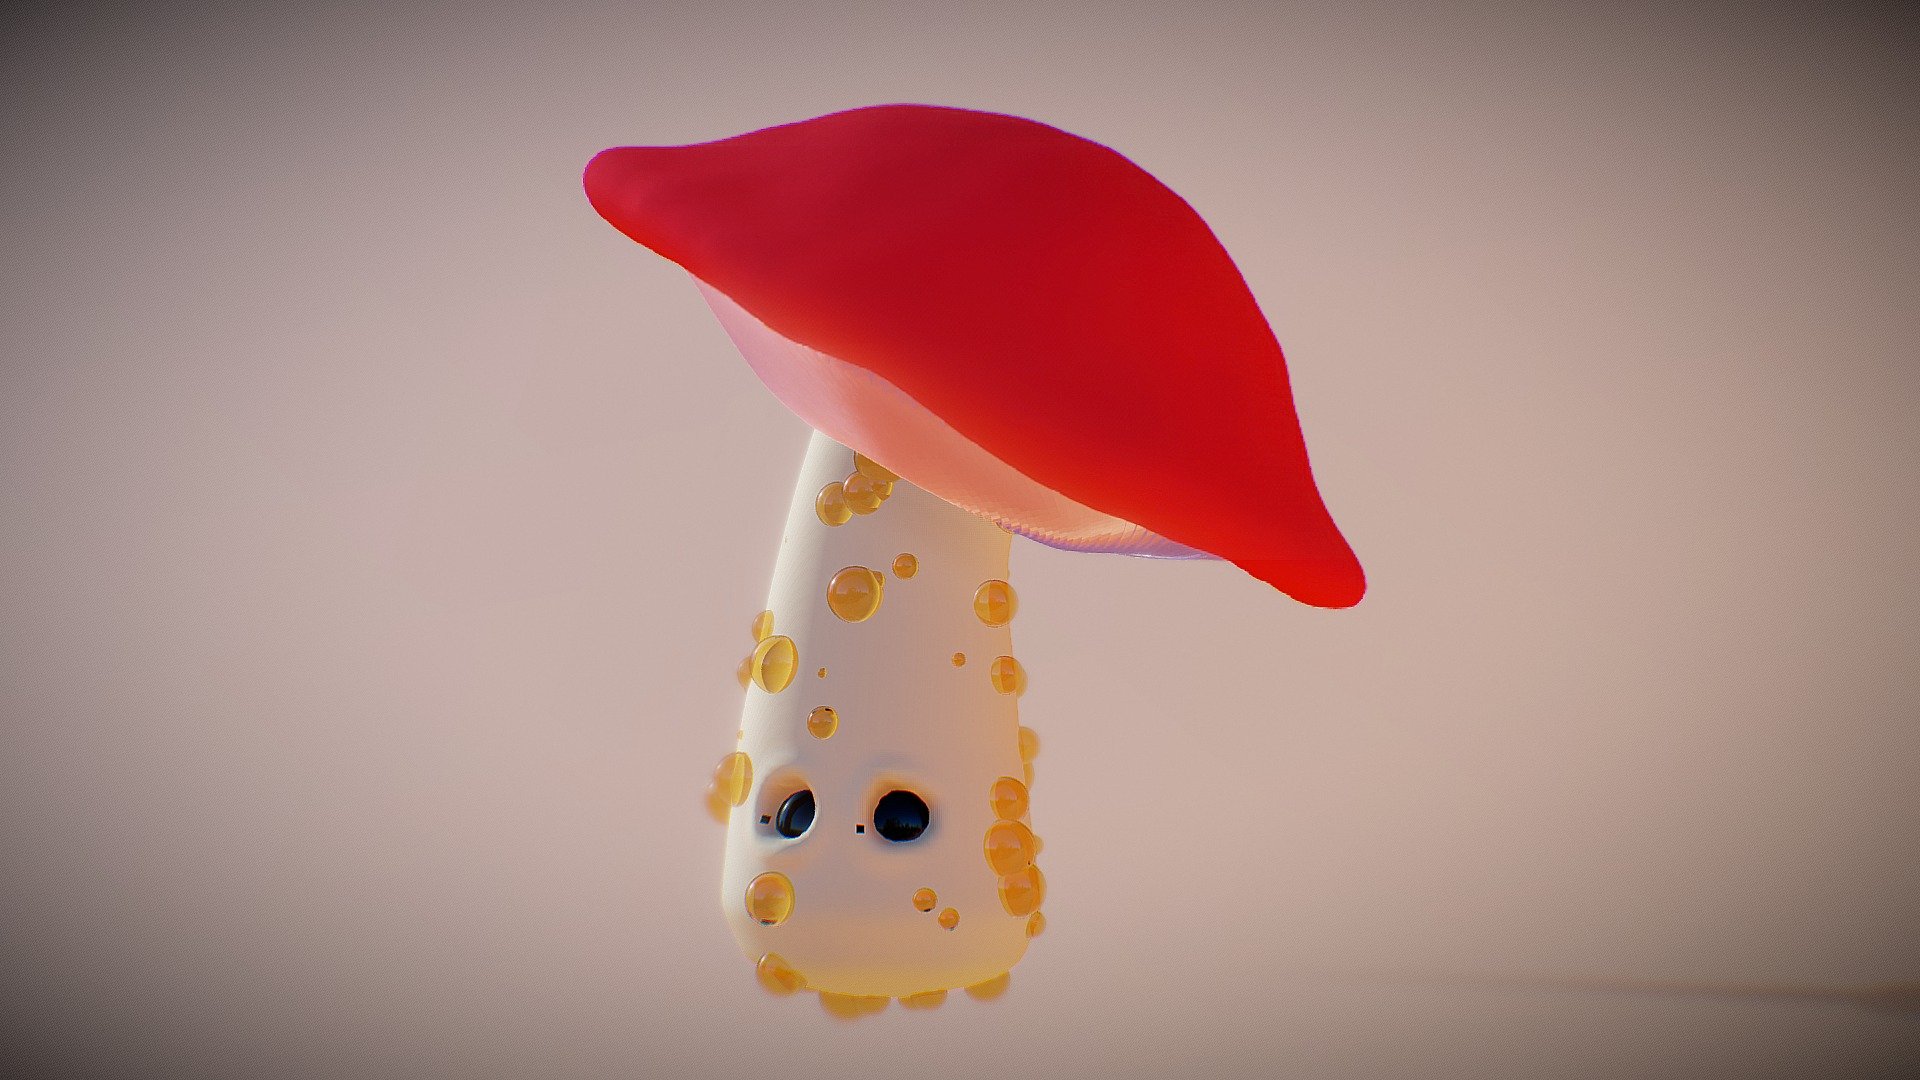 This model was feature in a a short, 30-second clip I animated. It's also the one featured in my profile picture. 
Video linked below: 
https://www.youtube.com/watch?v=3V3IGE7jh9c

The model is rigged, textured and includes a short animation of the mushroom exploring its surroundings

The file incldues one where all the mesh is joined to one object and is unrigged. This due to a bug with Sketchfab. The other will not appear on the Sketchfab 3D veiwer. Despite this, the model works great! 

Thanks and enjoy! - Animated Mushroom Character - Buy Royalty Free 3D model by FlynnFord 3d model